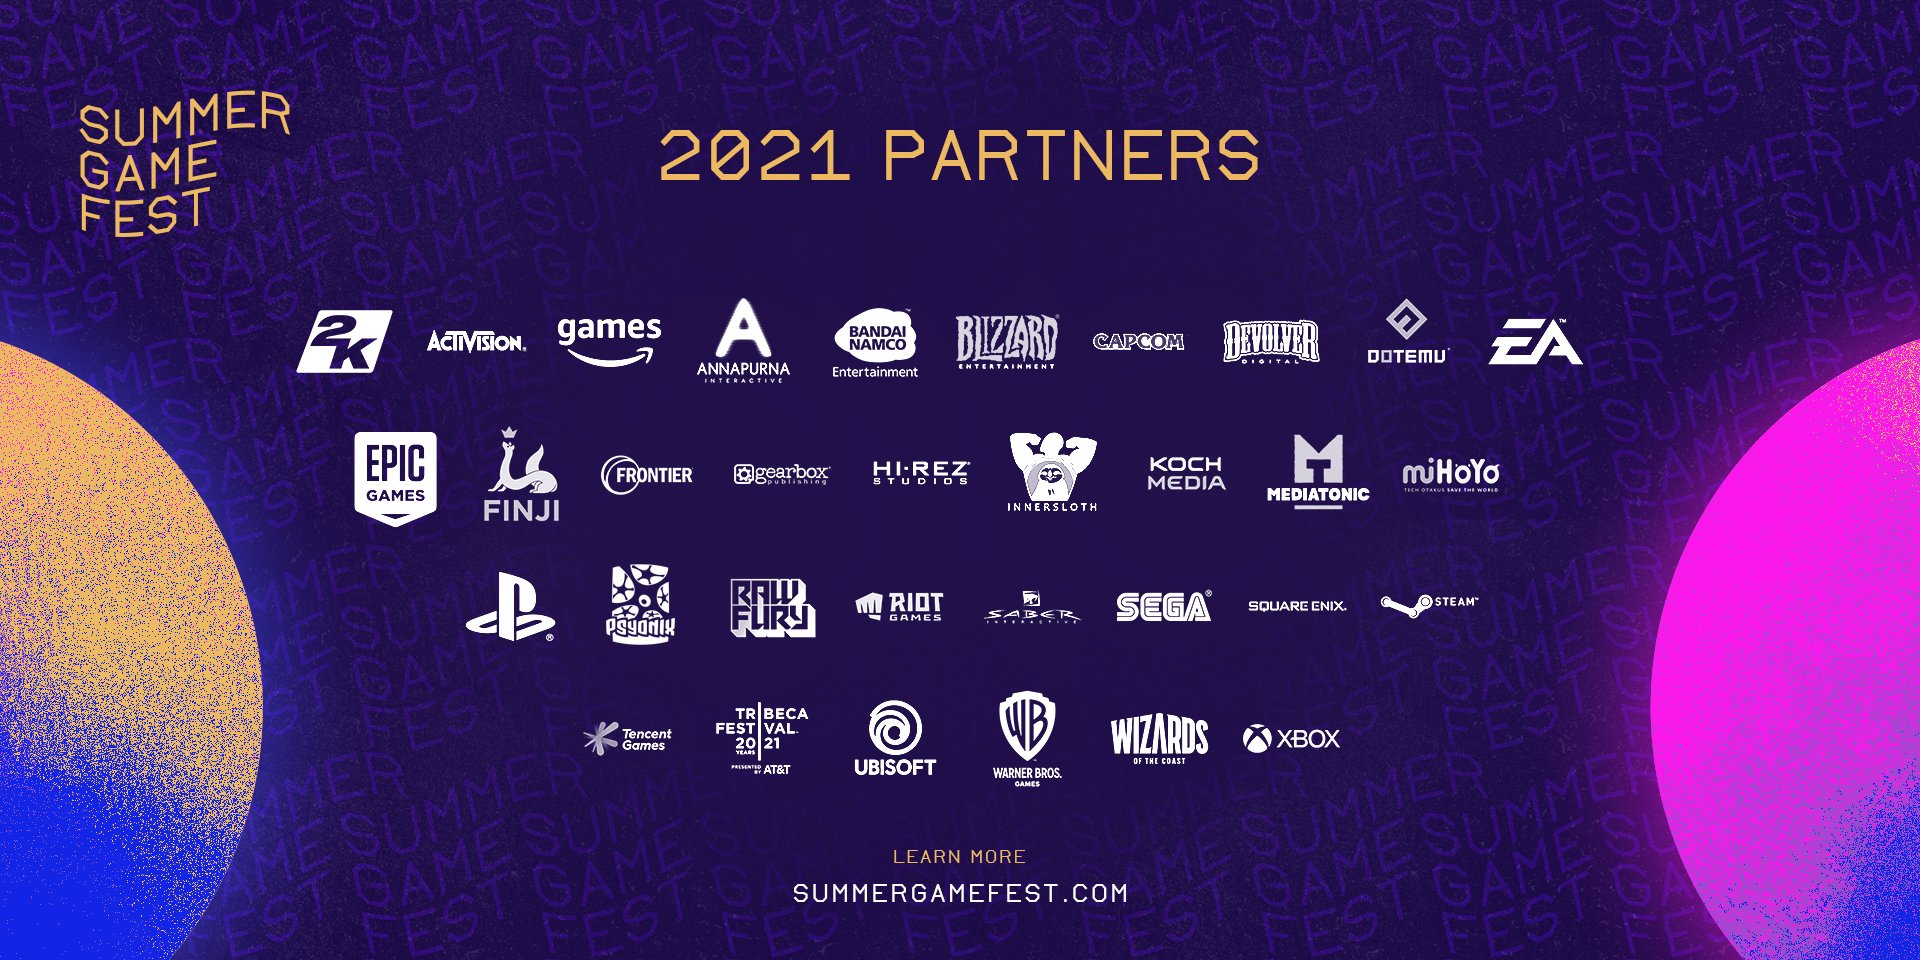 Ekspression Mængde af appetit Summer Game Fest on Twitter: "More partner announcements are coming next  week for #SummerGameFest Here's a look at the companies announced so far to  share updates with fans starting June 10: https://t.co/Qf3W0VjT3C" /